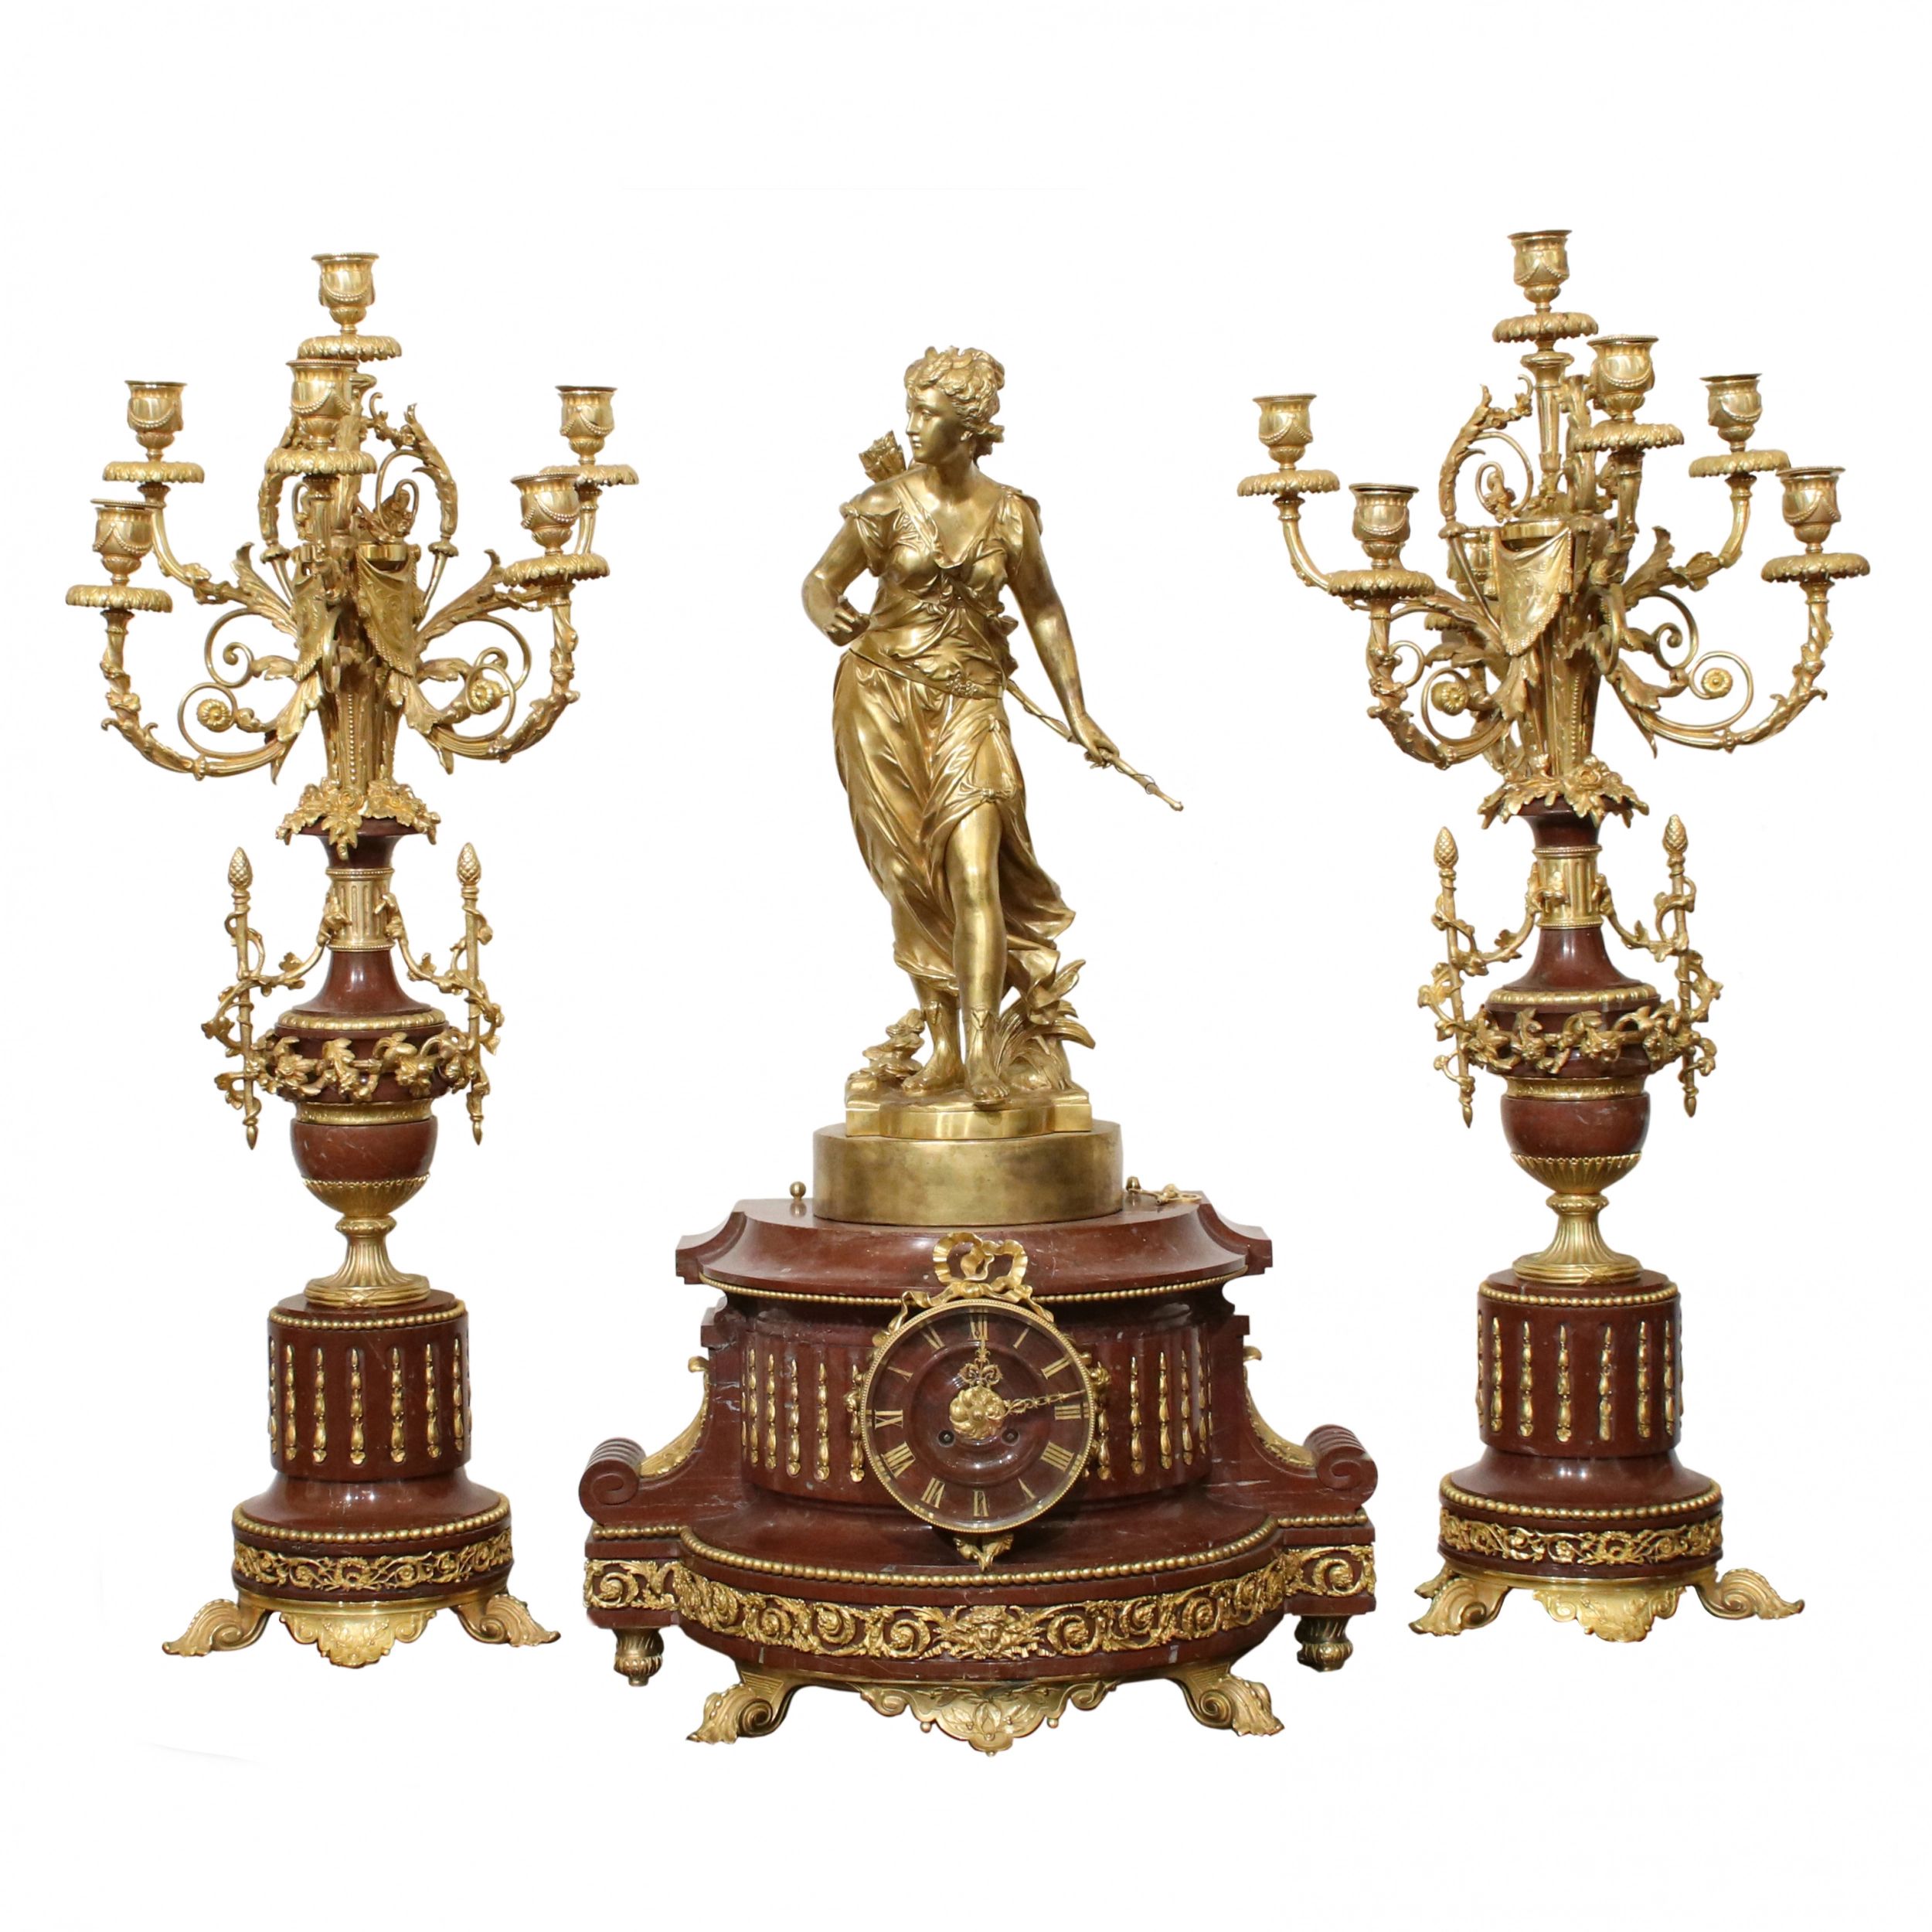 Bronze fireplace clock set with candelabra. - Image 3 of 5